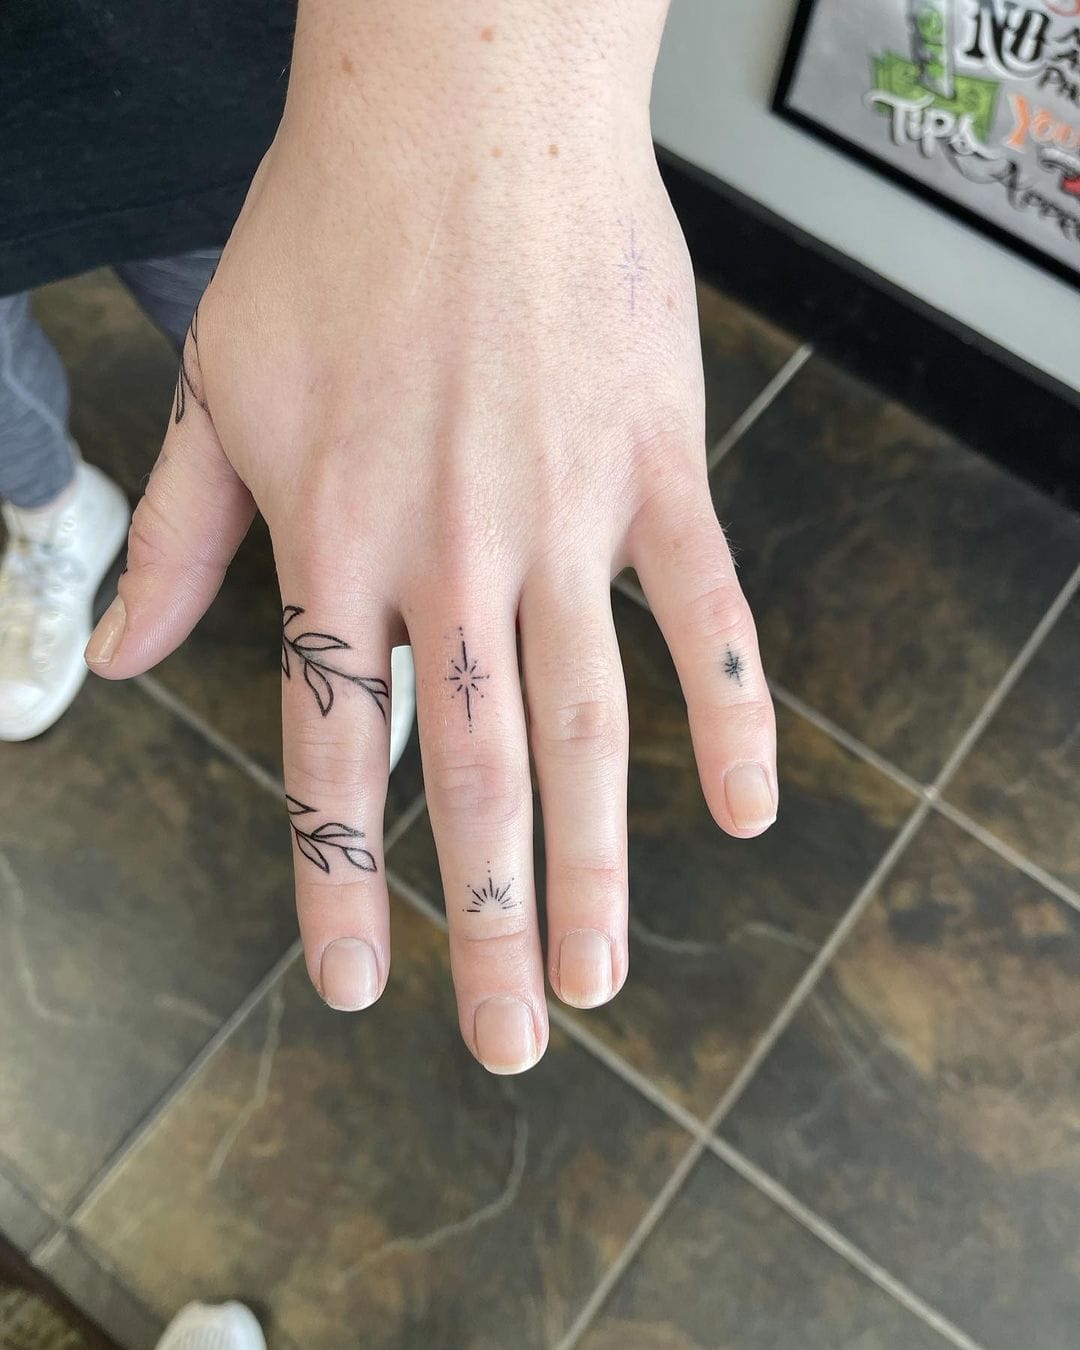 Some delicate floral finger tattoos from womb2tombtattoos  tattoo  tattooartist fingertattoos handtattoo vine vinetattoo  Instagram